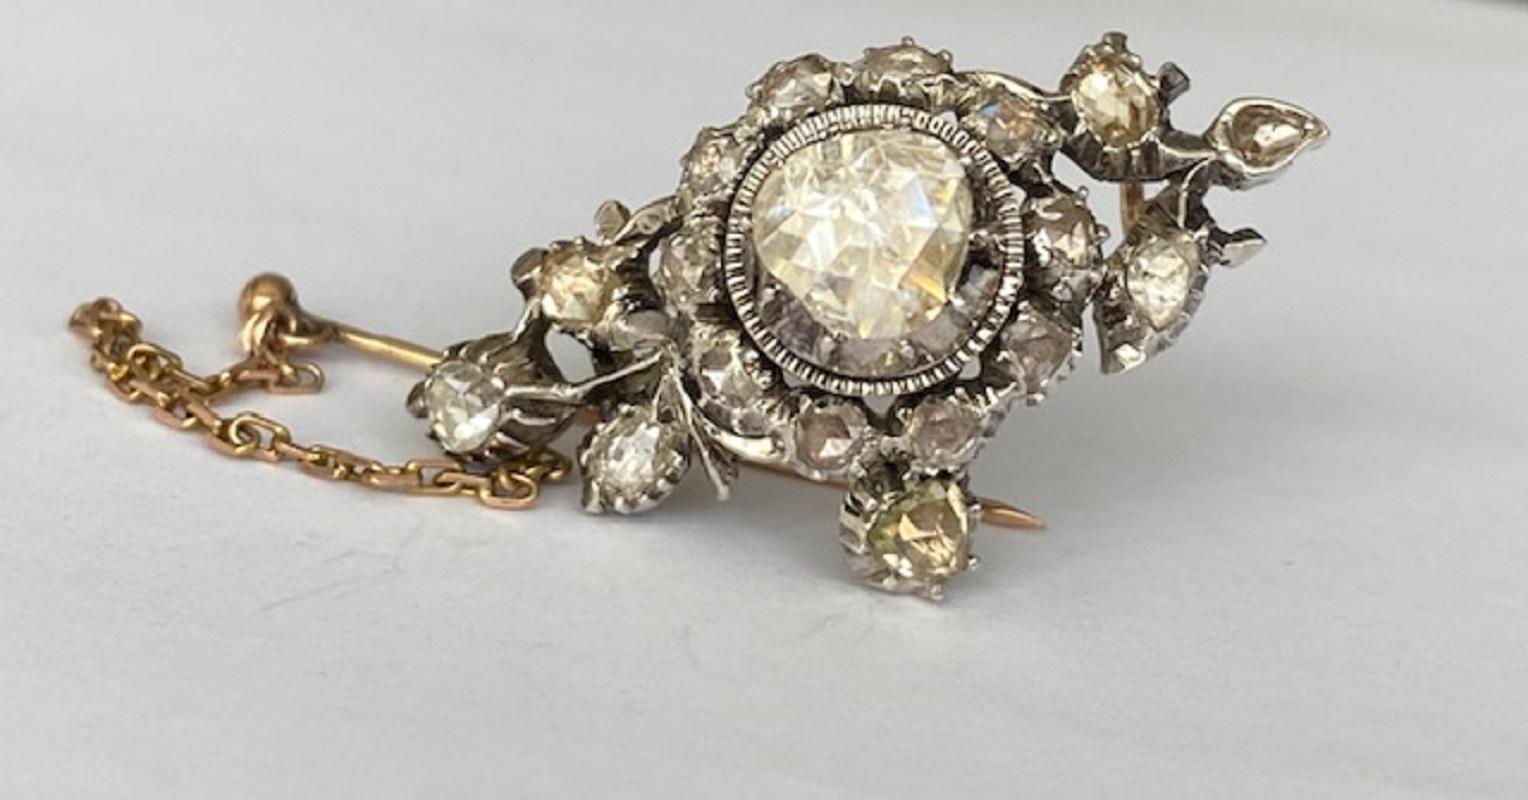 This beautiful antique brooch is made of 14 karat yellow gold and silver and comes from MT J. Rozendaal in Hoorn, 1923 - 1926. The brooch is entirely set with rose diamonds, of which one diamond in the centre is approx. 2.30 ct (a modern brilliant